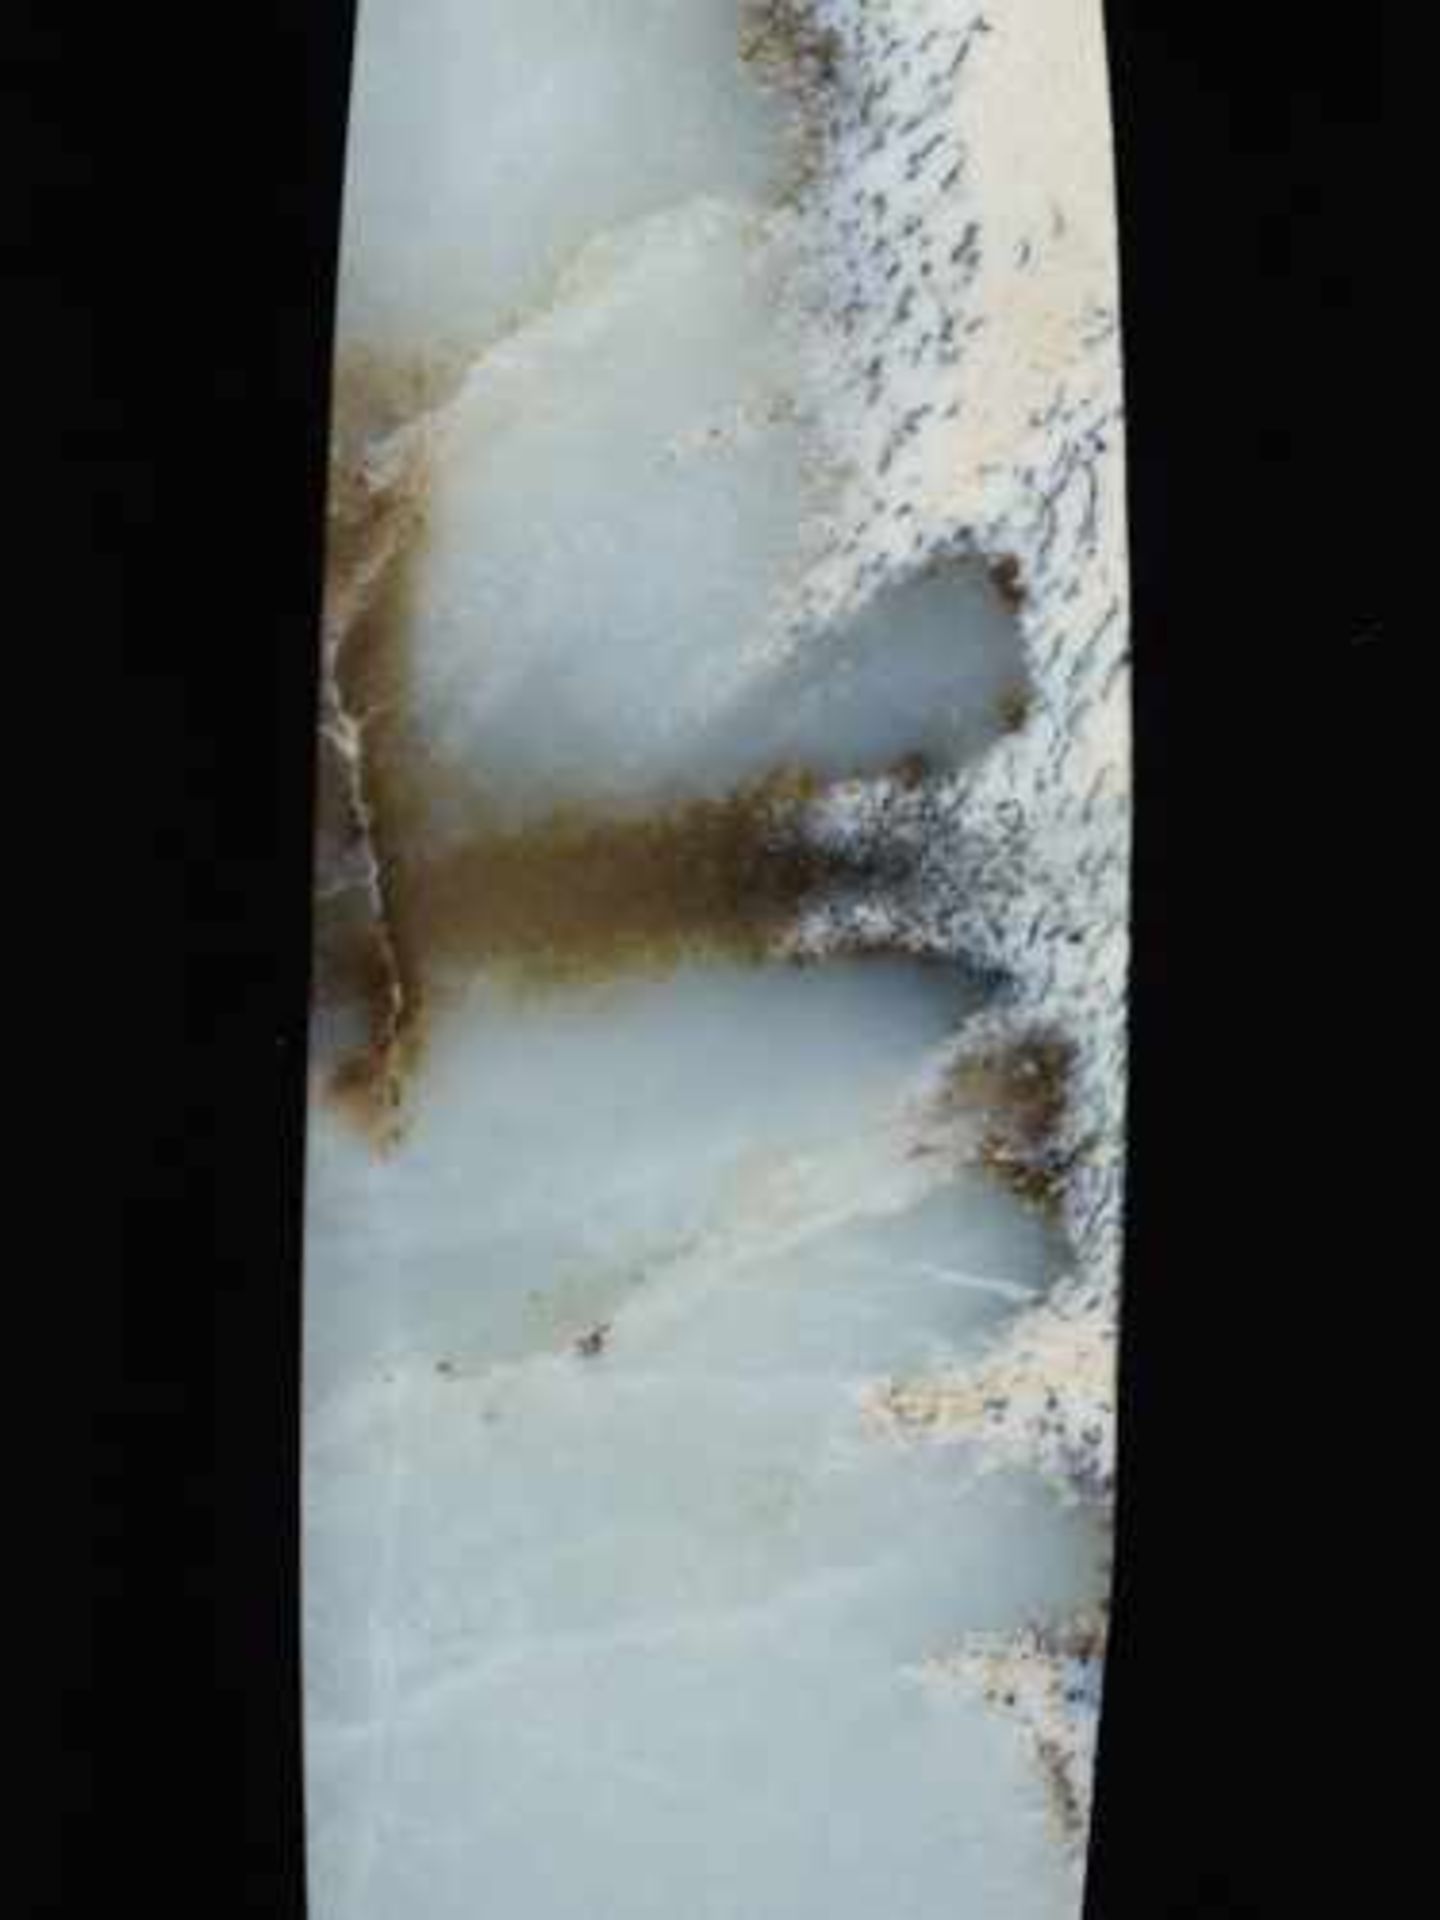 A STRIKING MARBLE-LIKE BEN BLADE IN WHITE JADE Jade, China. Early Bronze Age, Qijia Culture, c. - Image 3 of 7